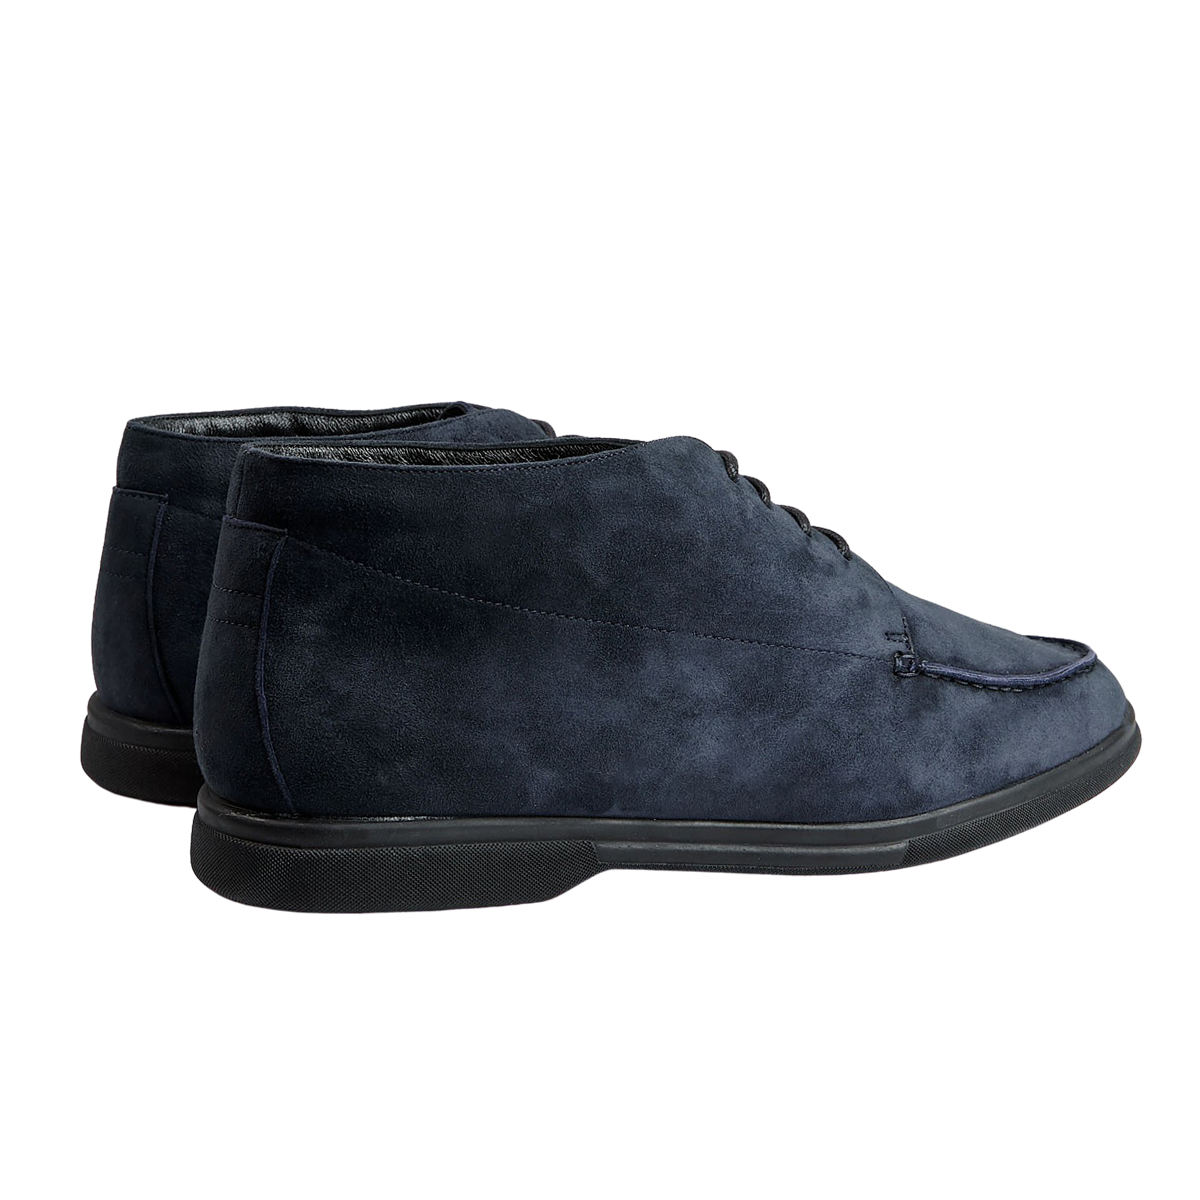 Blue Suede Furlined Soft Chukka Boots 